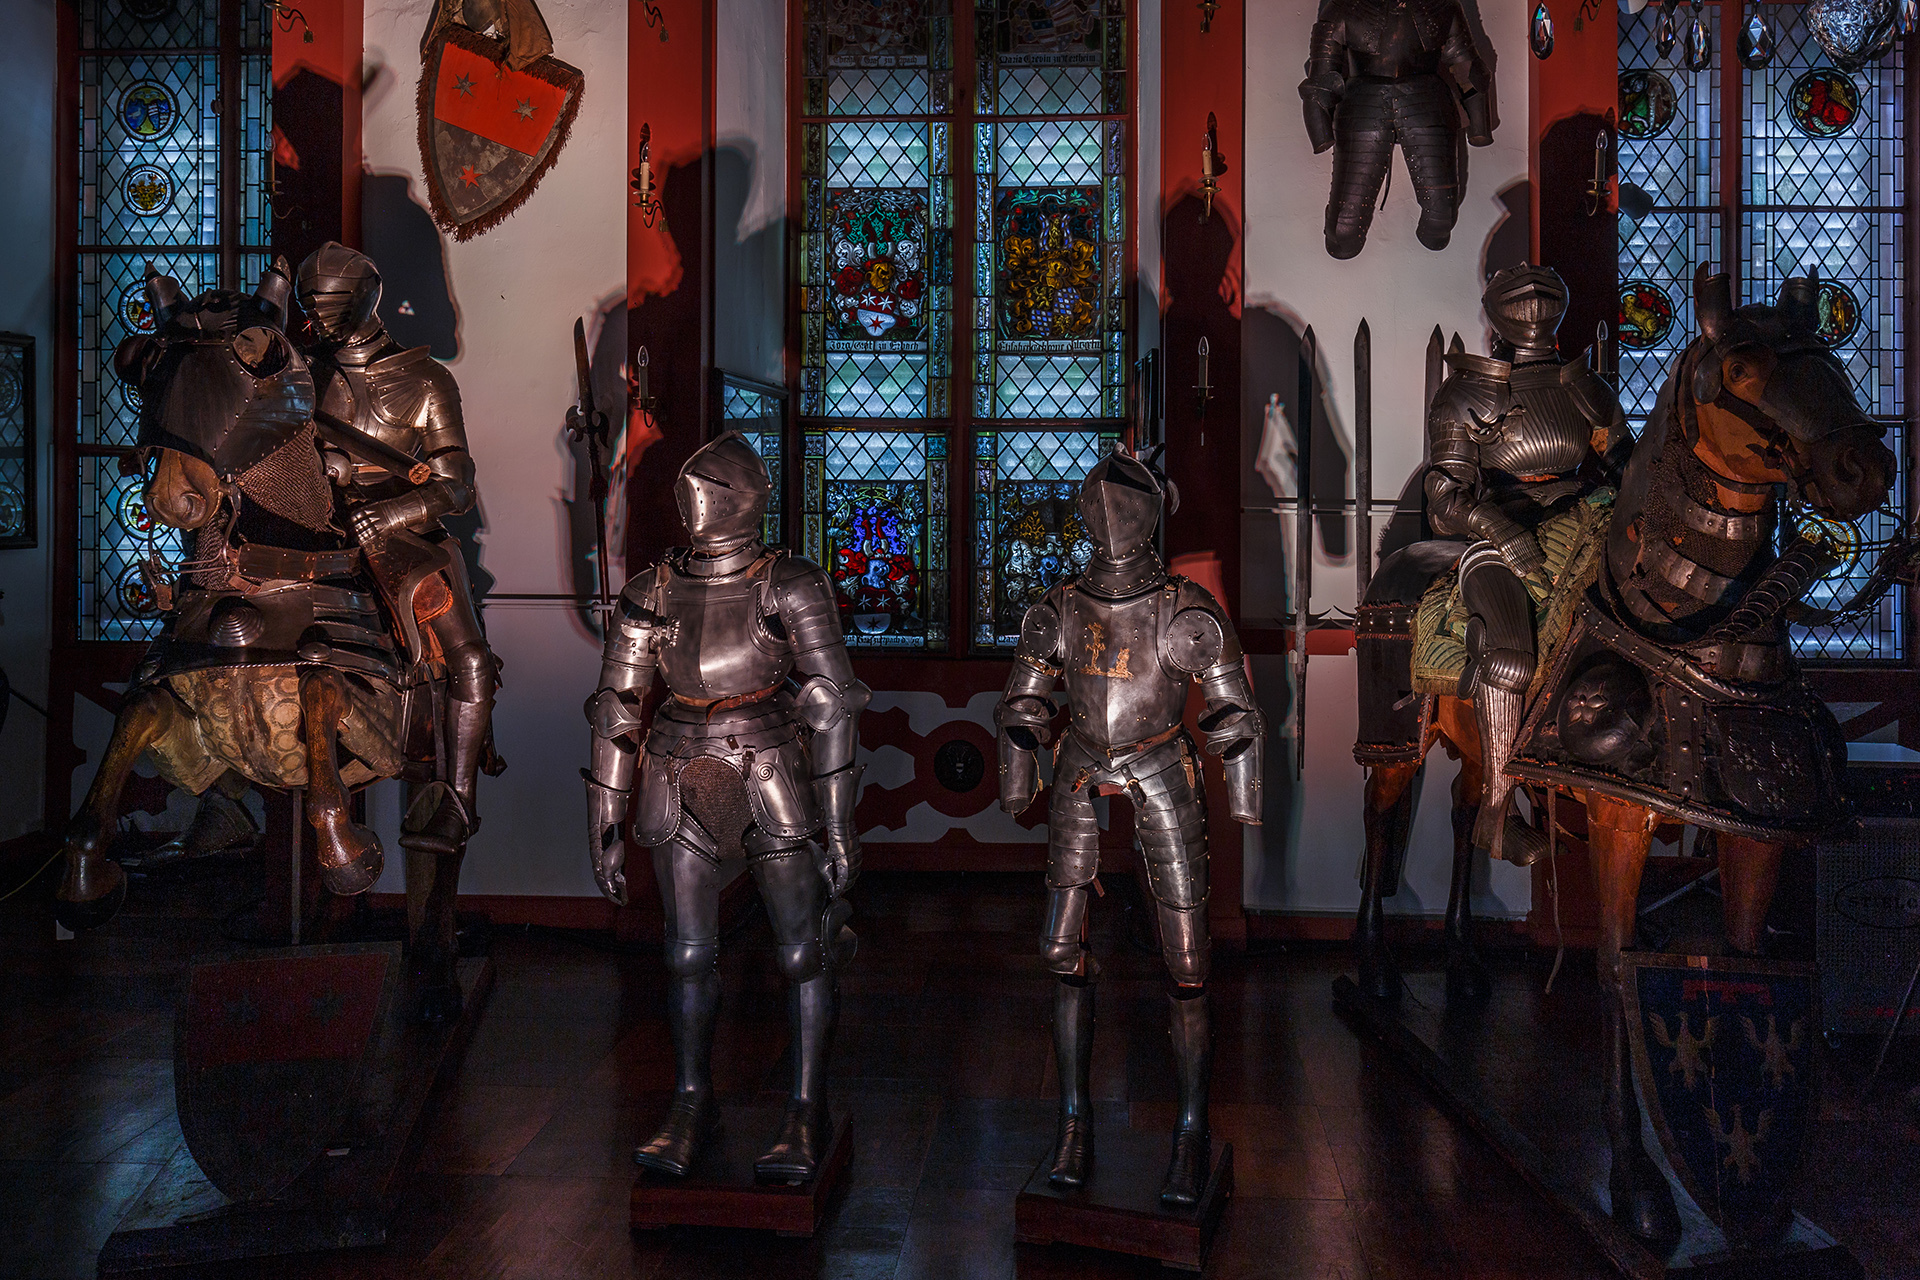 Knights' armour in the Knights' Hall